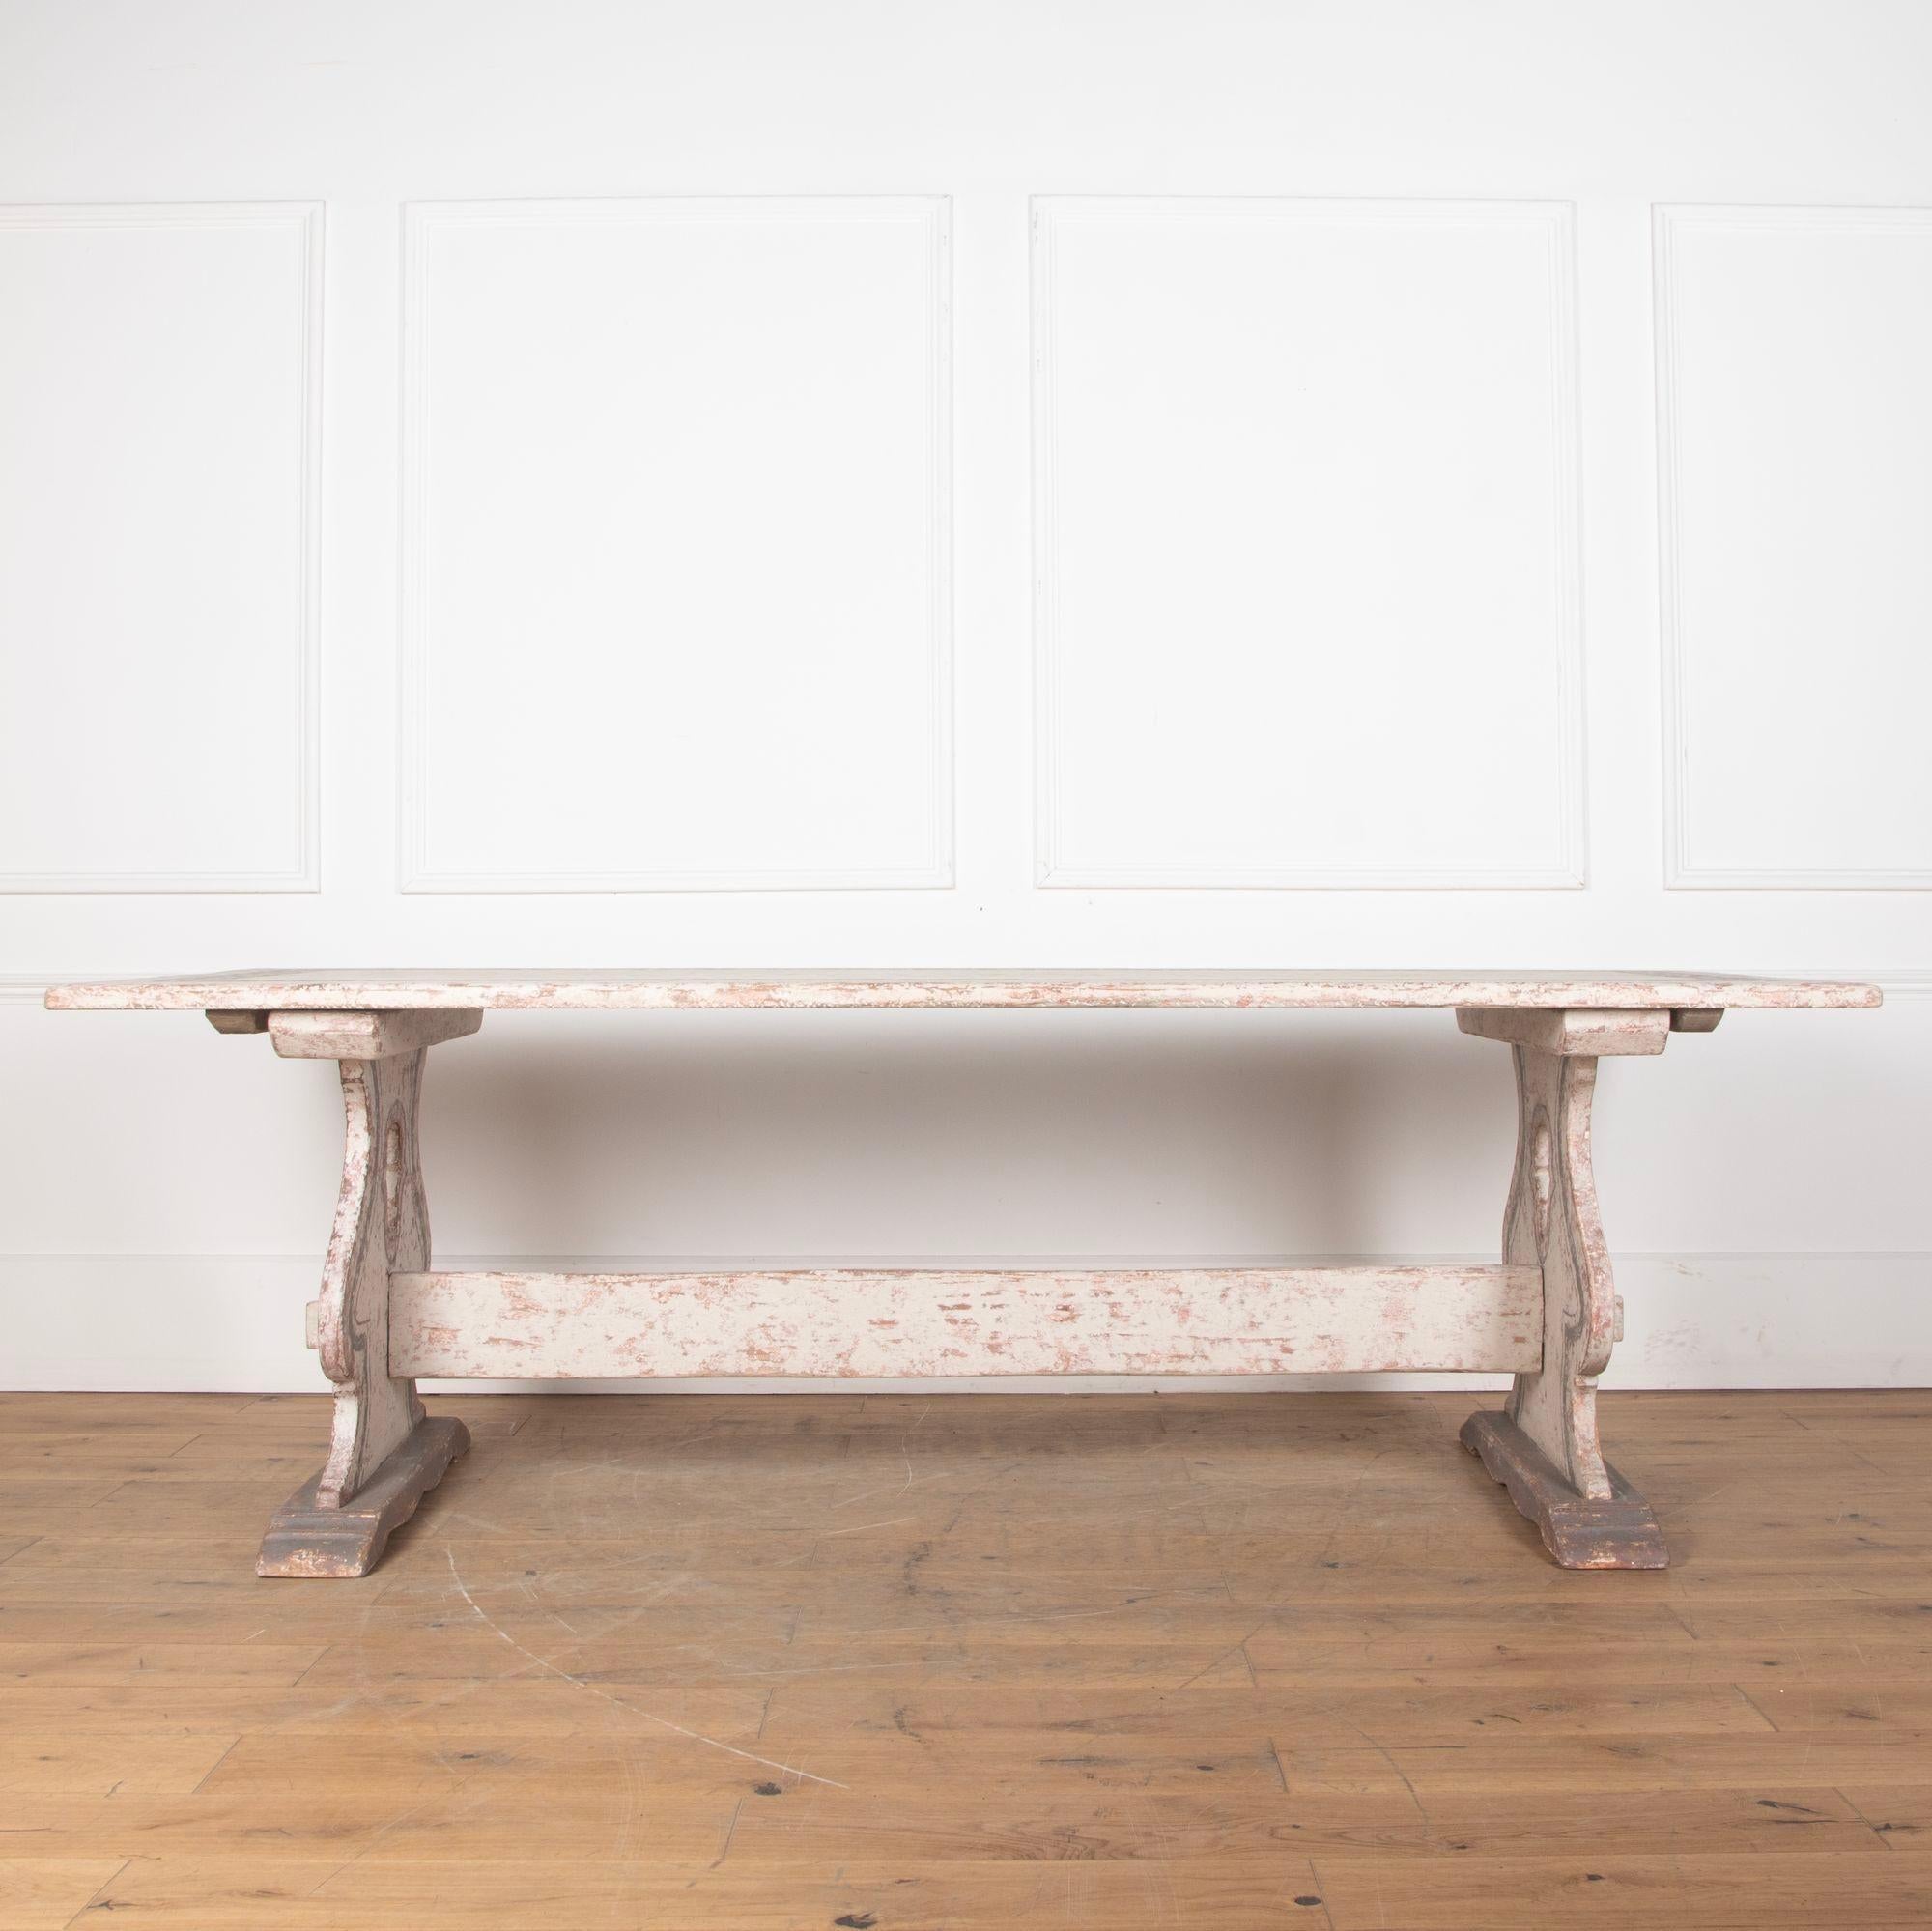 
Large early 20th Century Italian trestle table.
Crafted in pine with later painted finish.
From the Verona region, 1920-30.



This item is currently in storage and therefore we need 48 hours notice for viewings. Please contact us before travelling